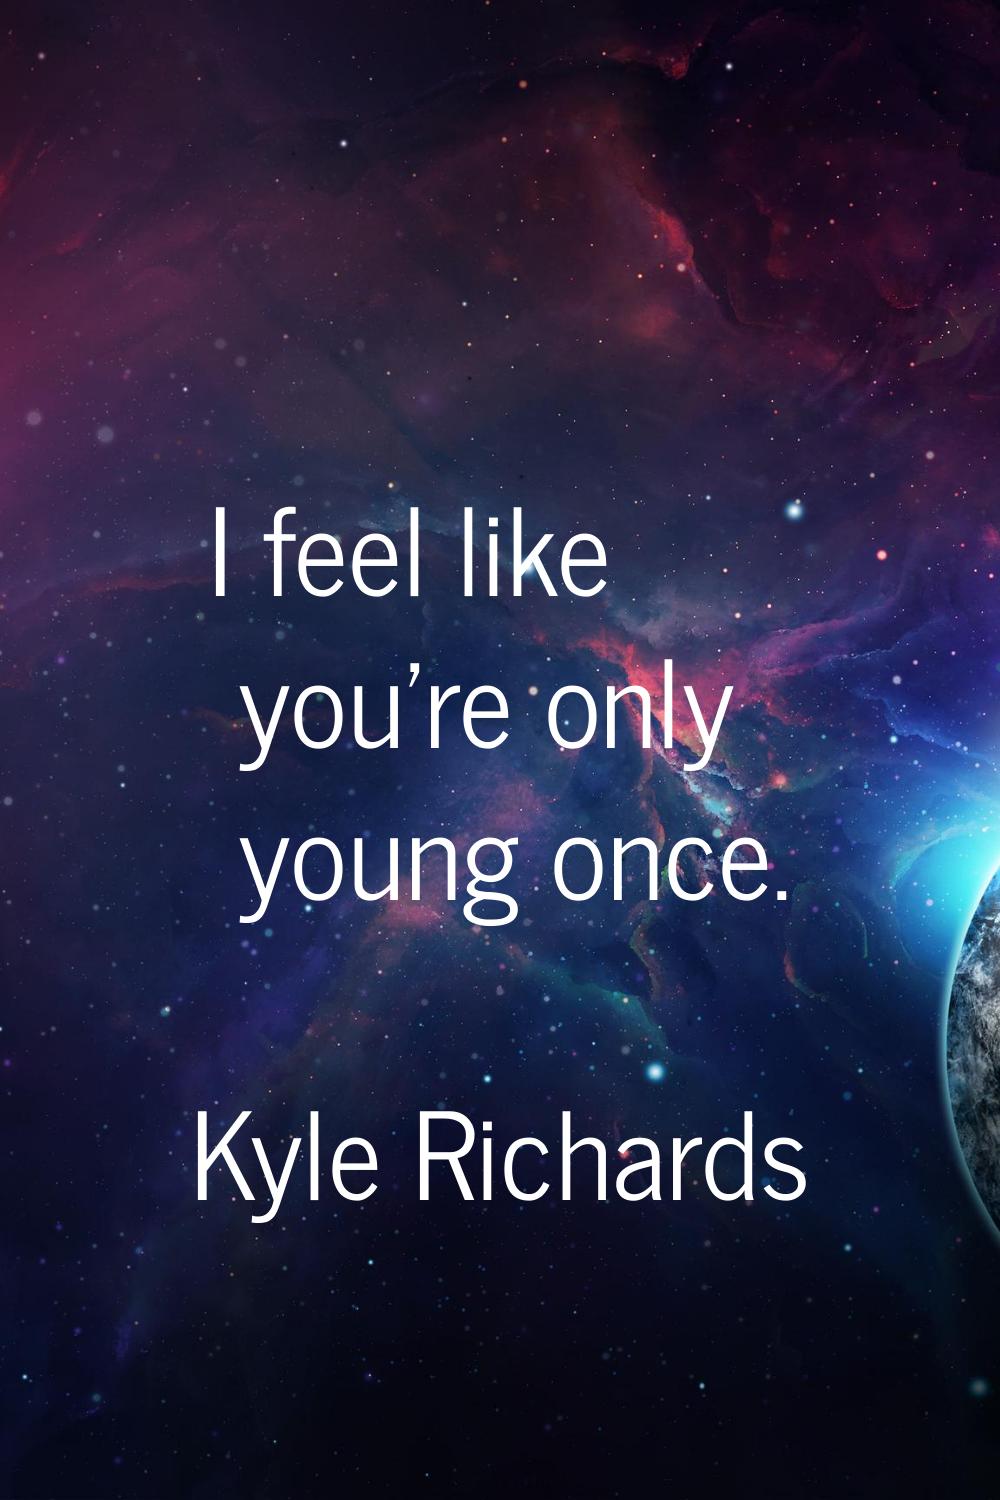 I feel like you're only young once.